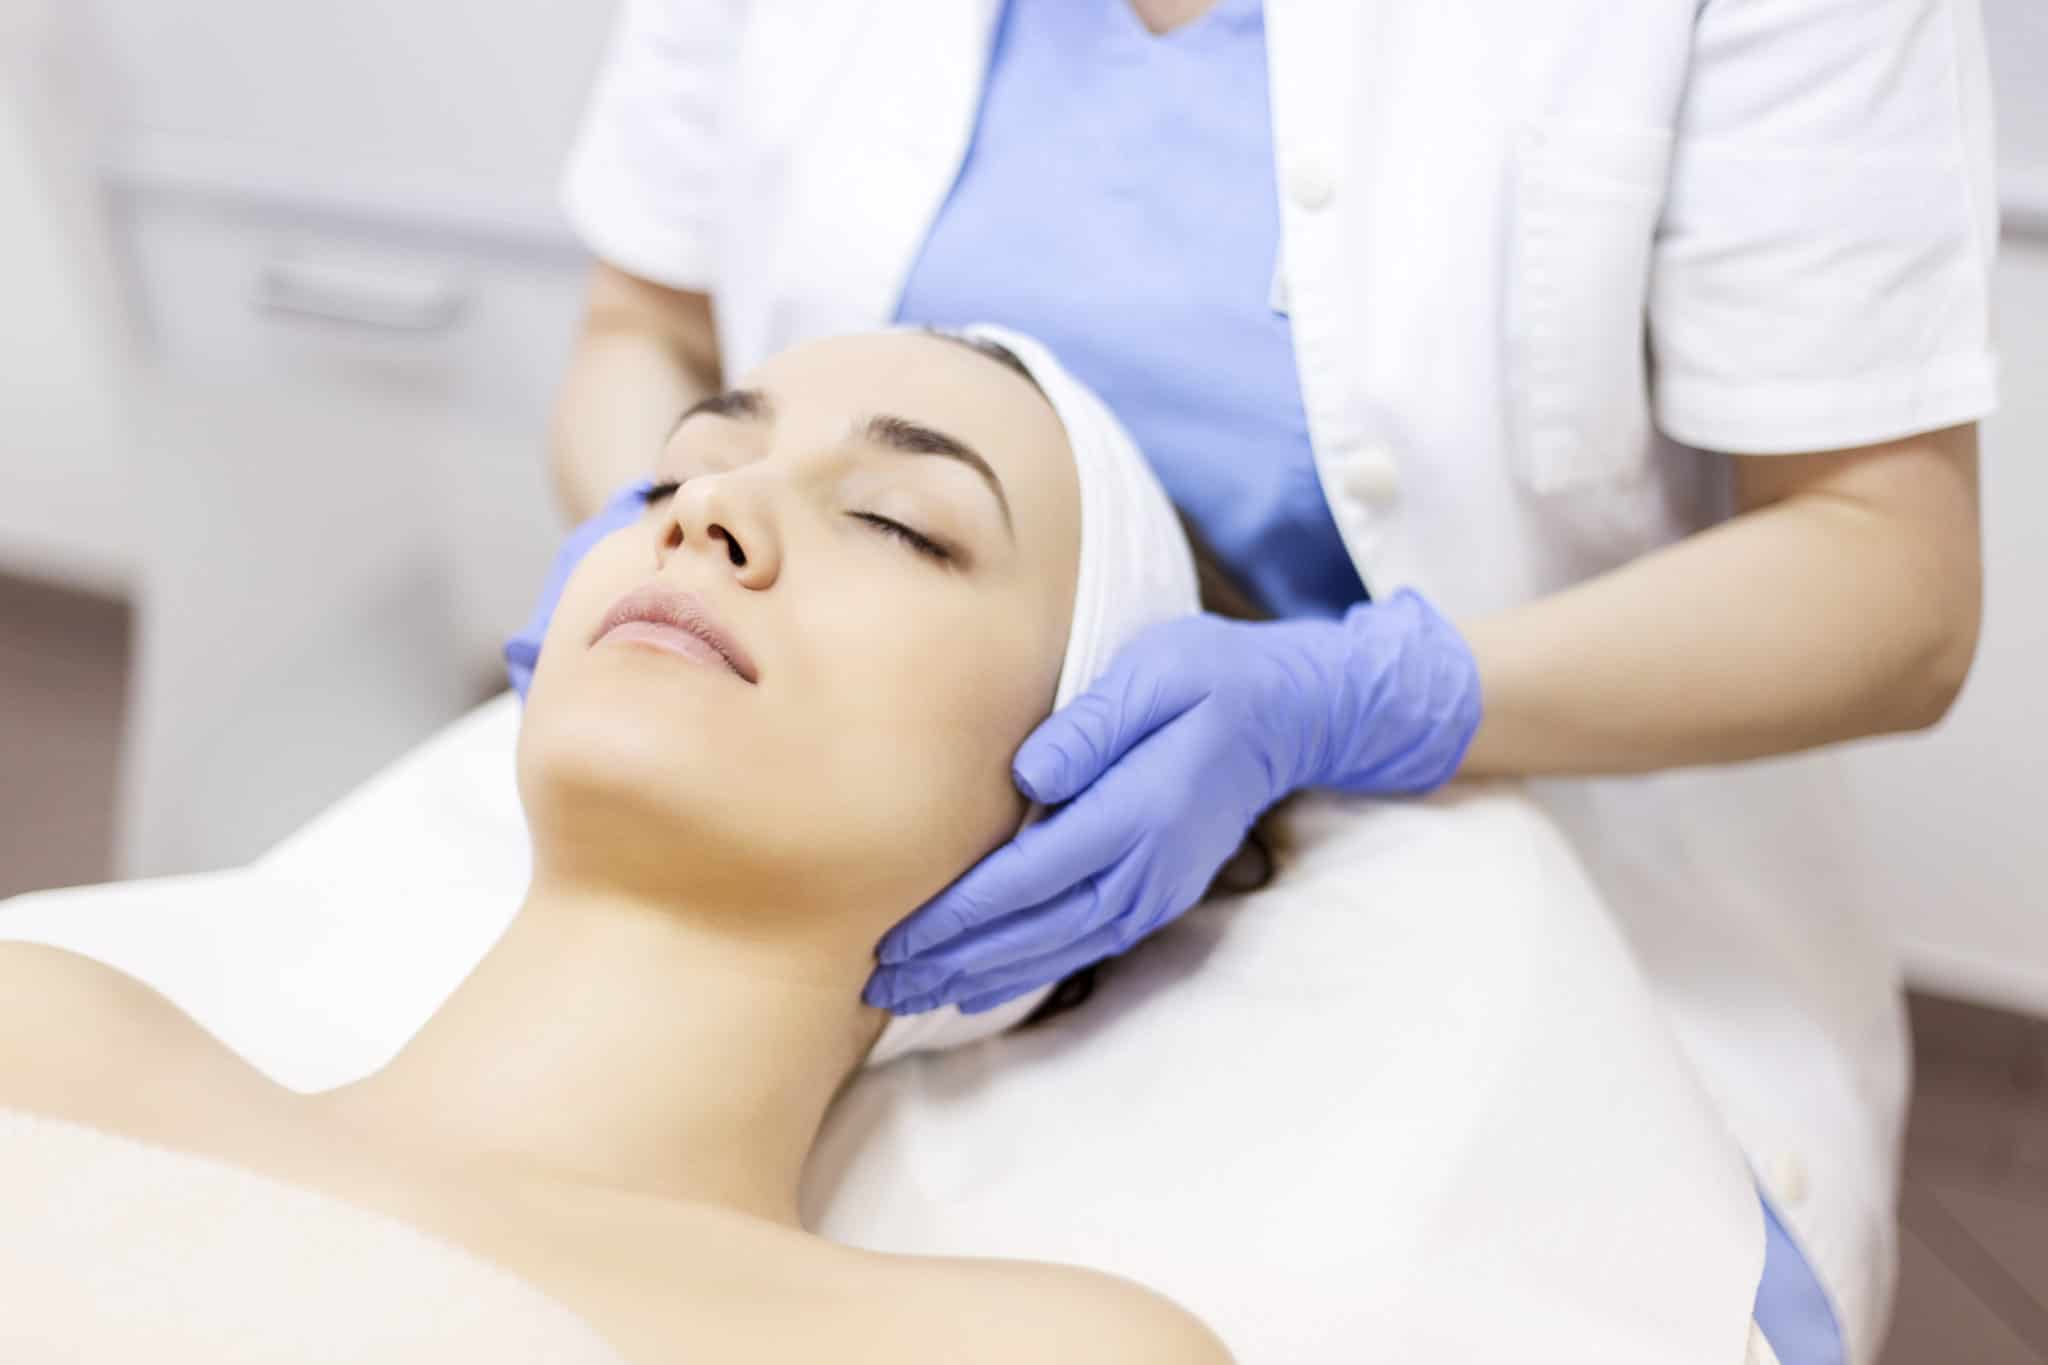 Woman relaxing at medical spa, about to receive chemical peel treatment